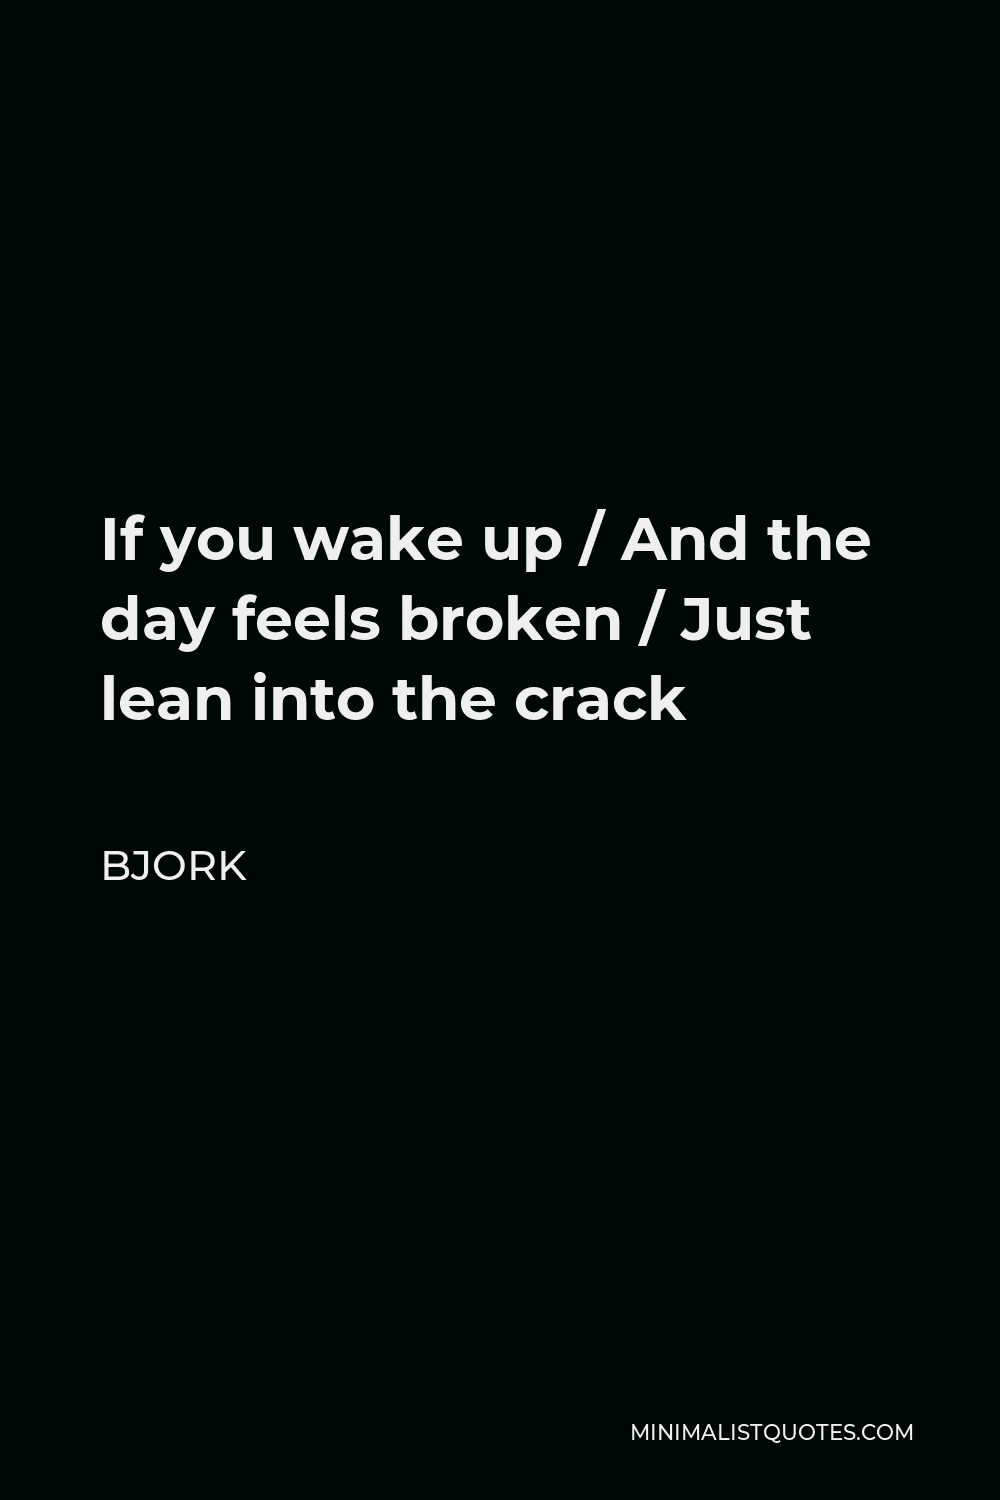 Bjork Quote - If you wake up / And the day feels broken / Just lean into the crack